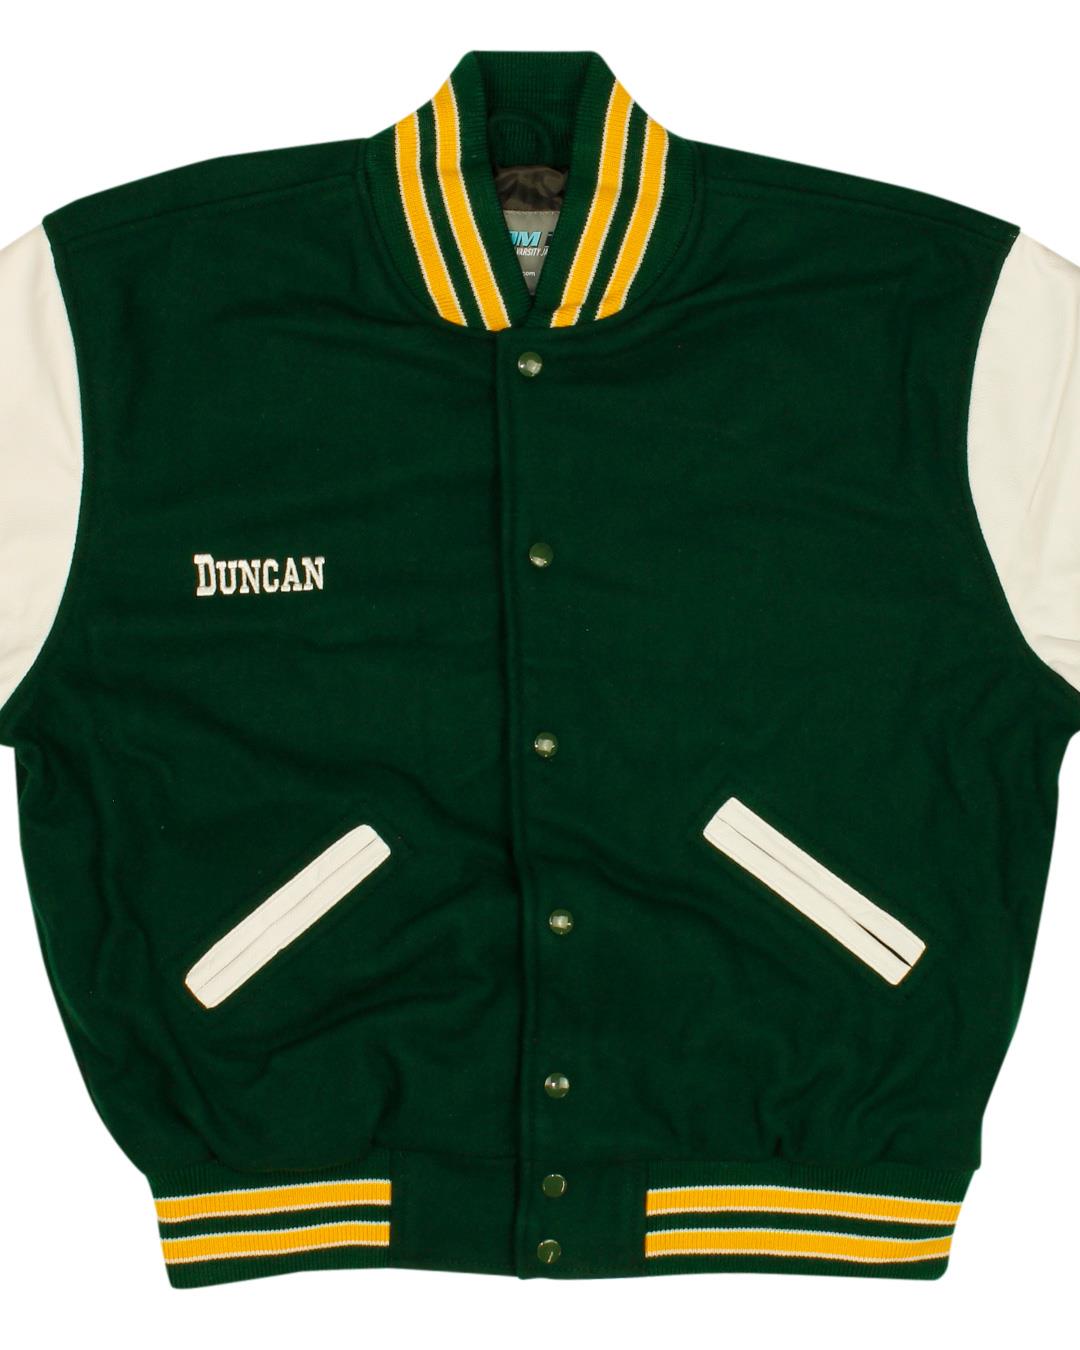 Livermore High School Letterman Jacket, Livermore CA - Front